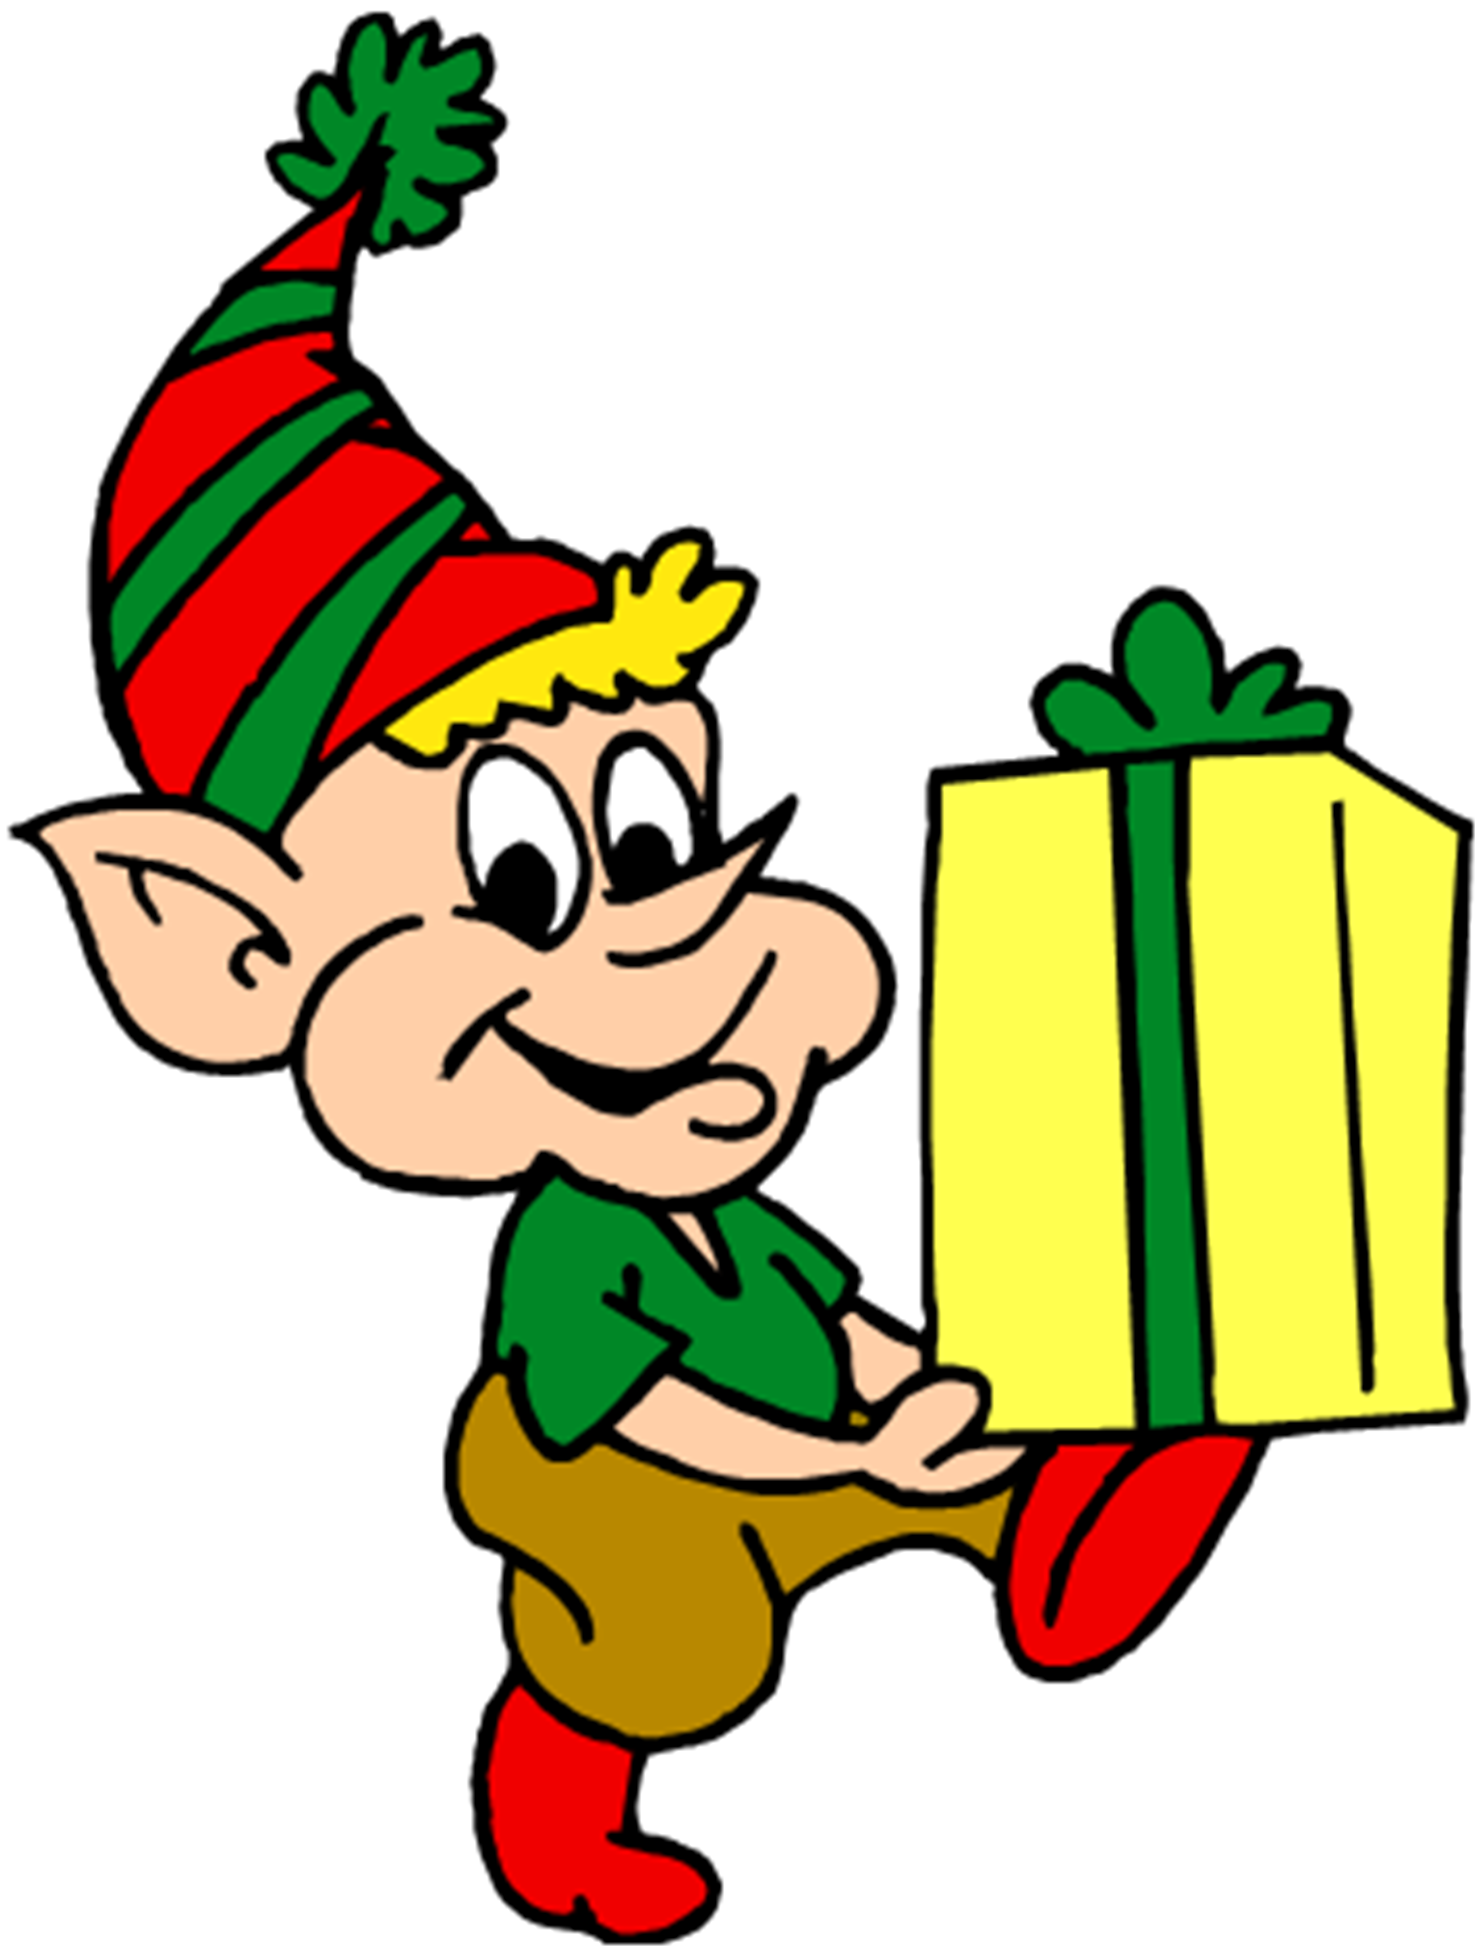 clipart images of elves - photo #29